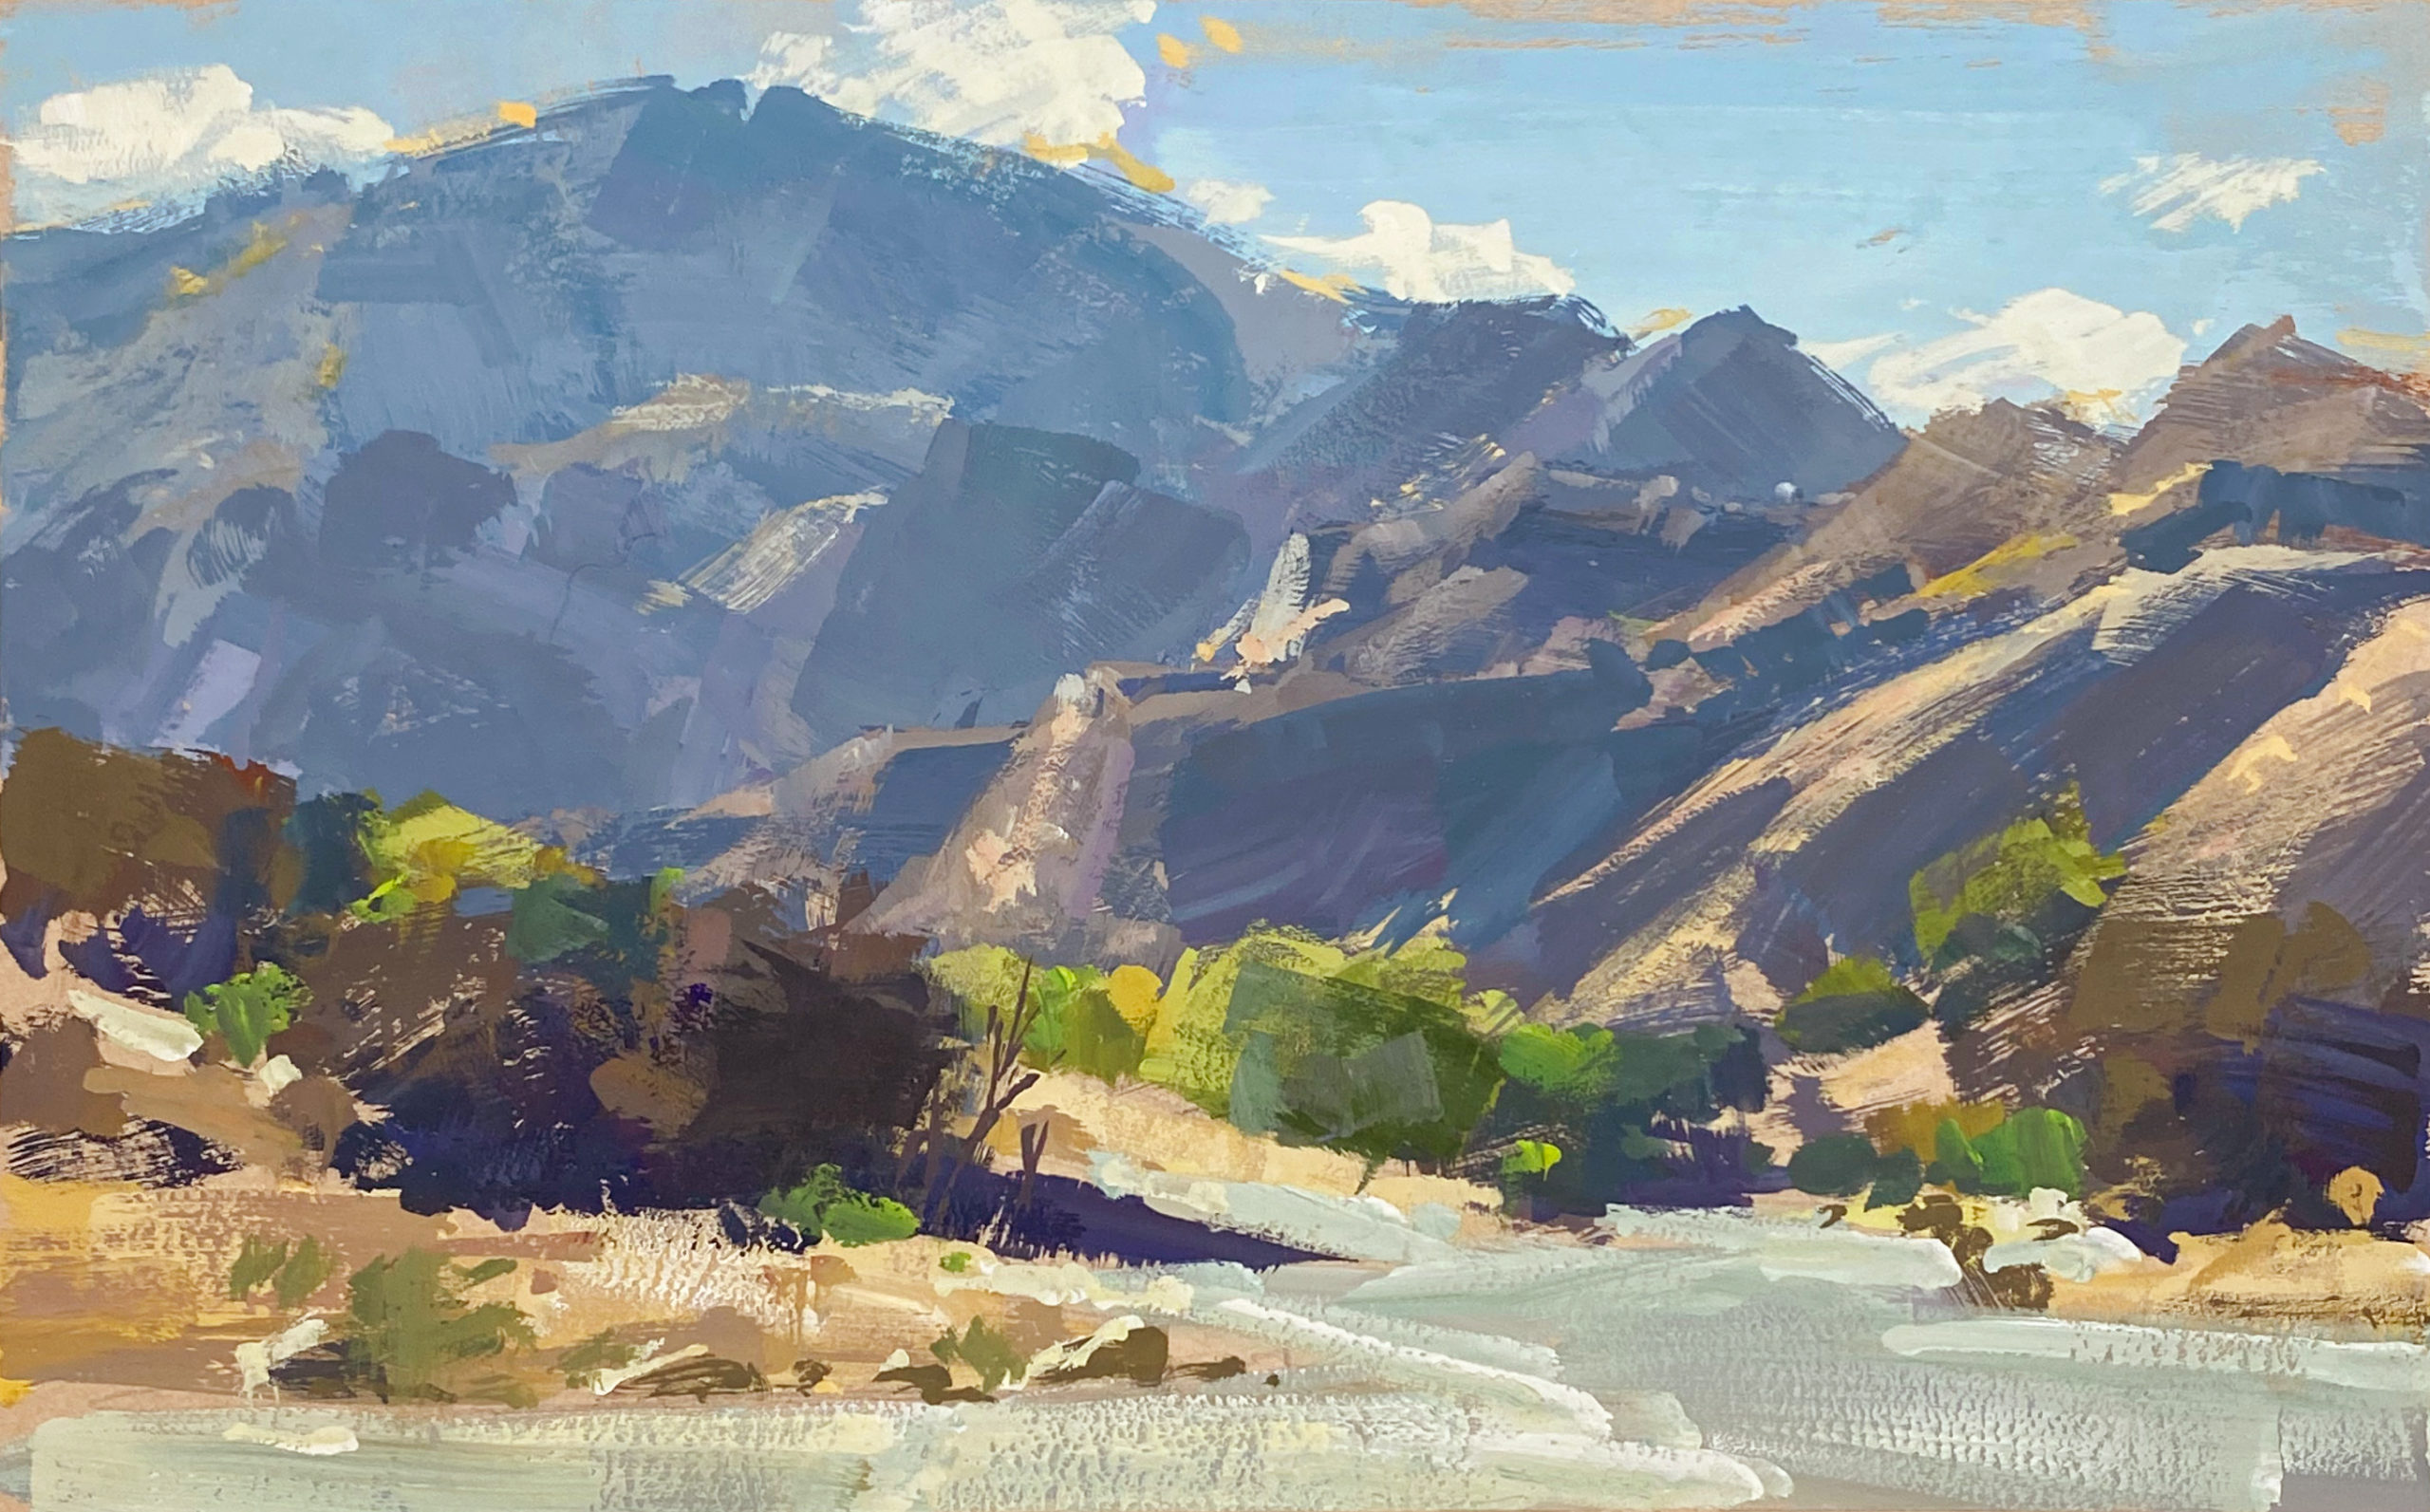 6. “Towsley Canyon” (5x8 in., gouache on bristol paper)